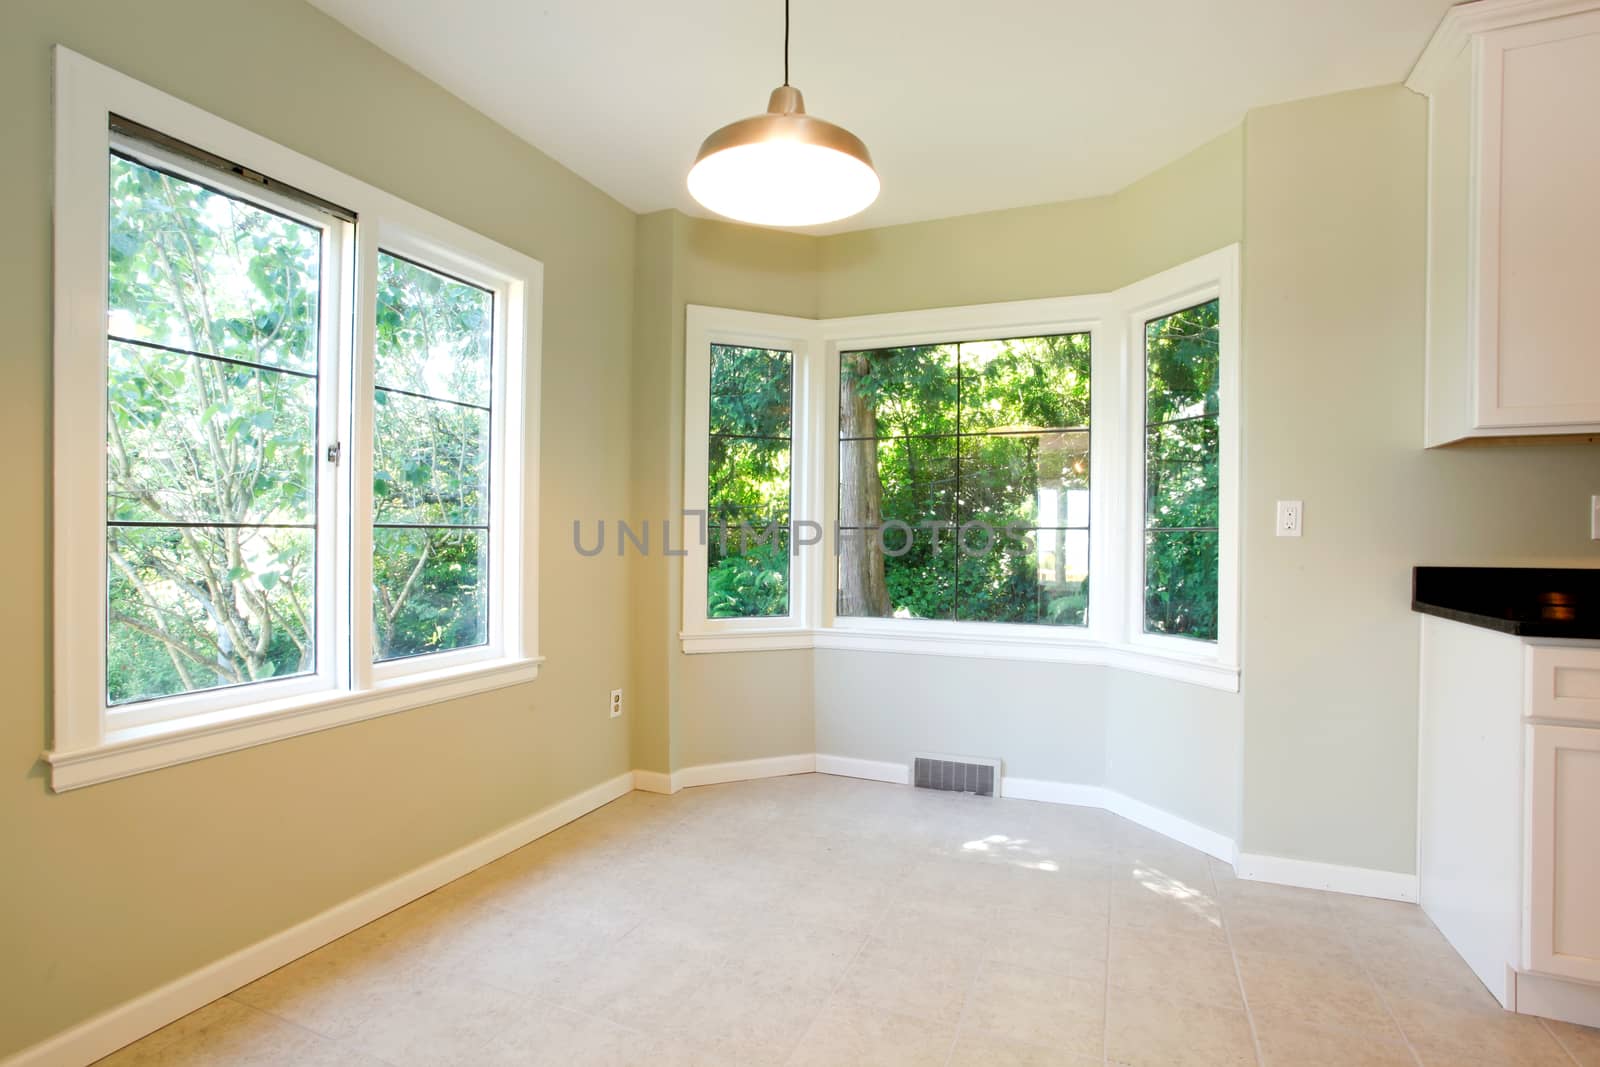 Bright empty dining room interior with tile floor and round corner